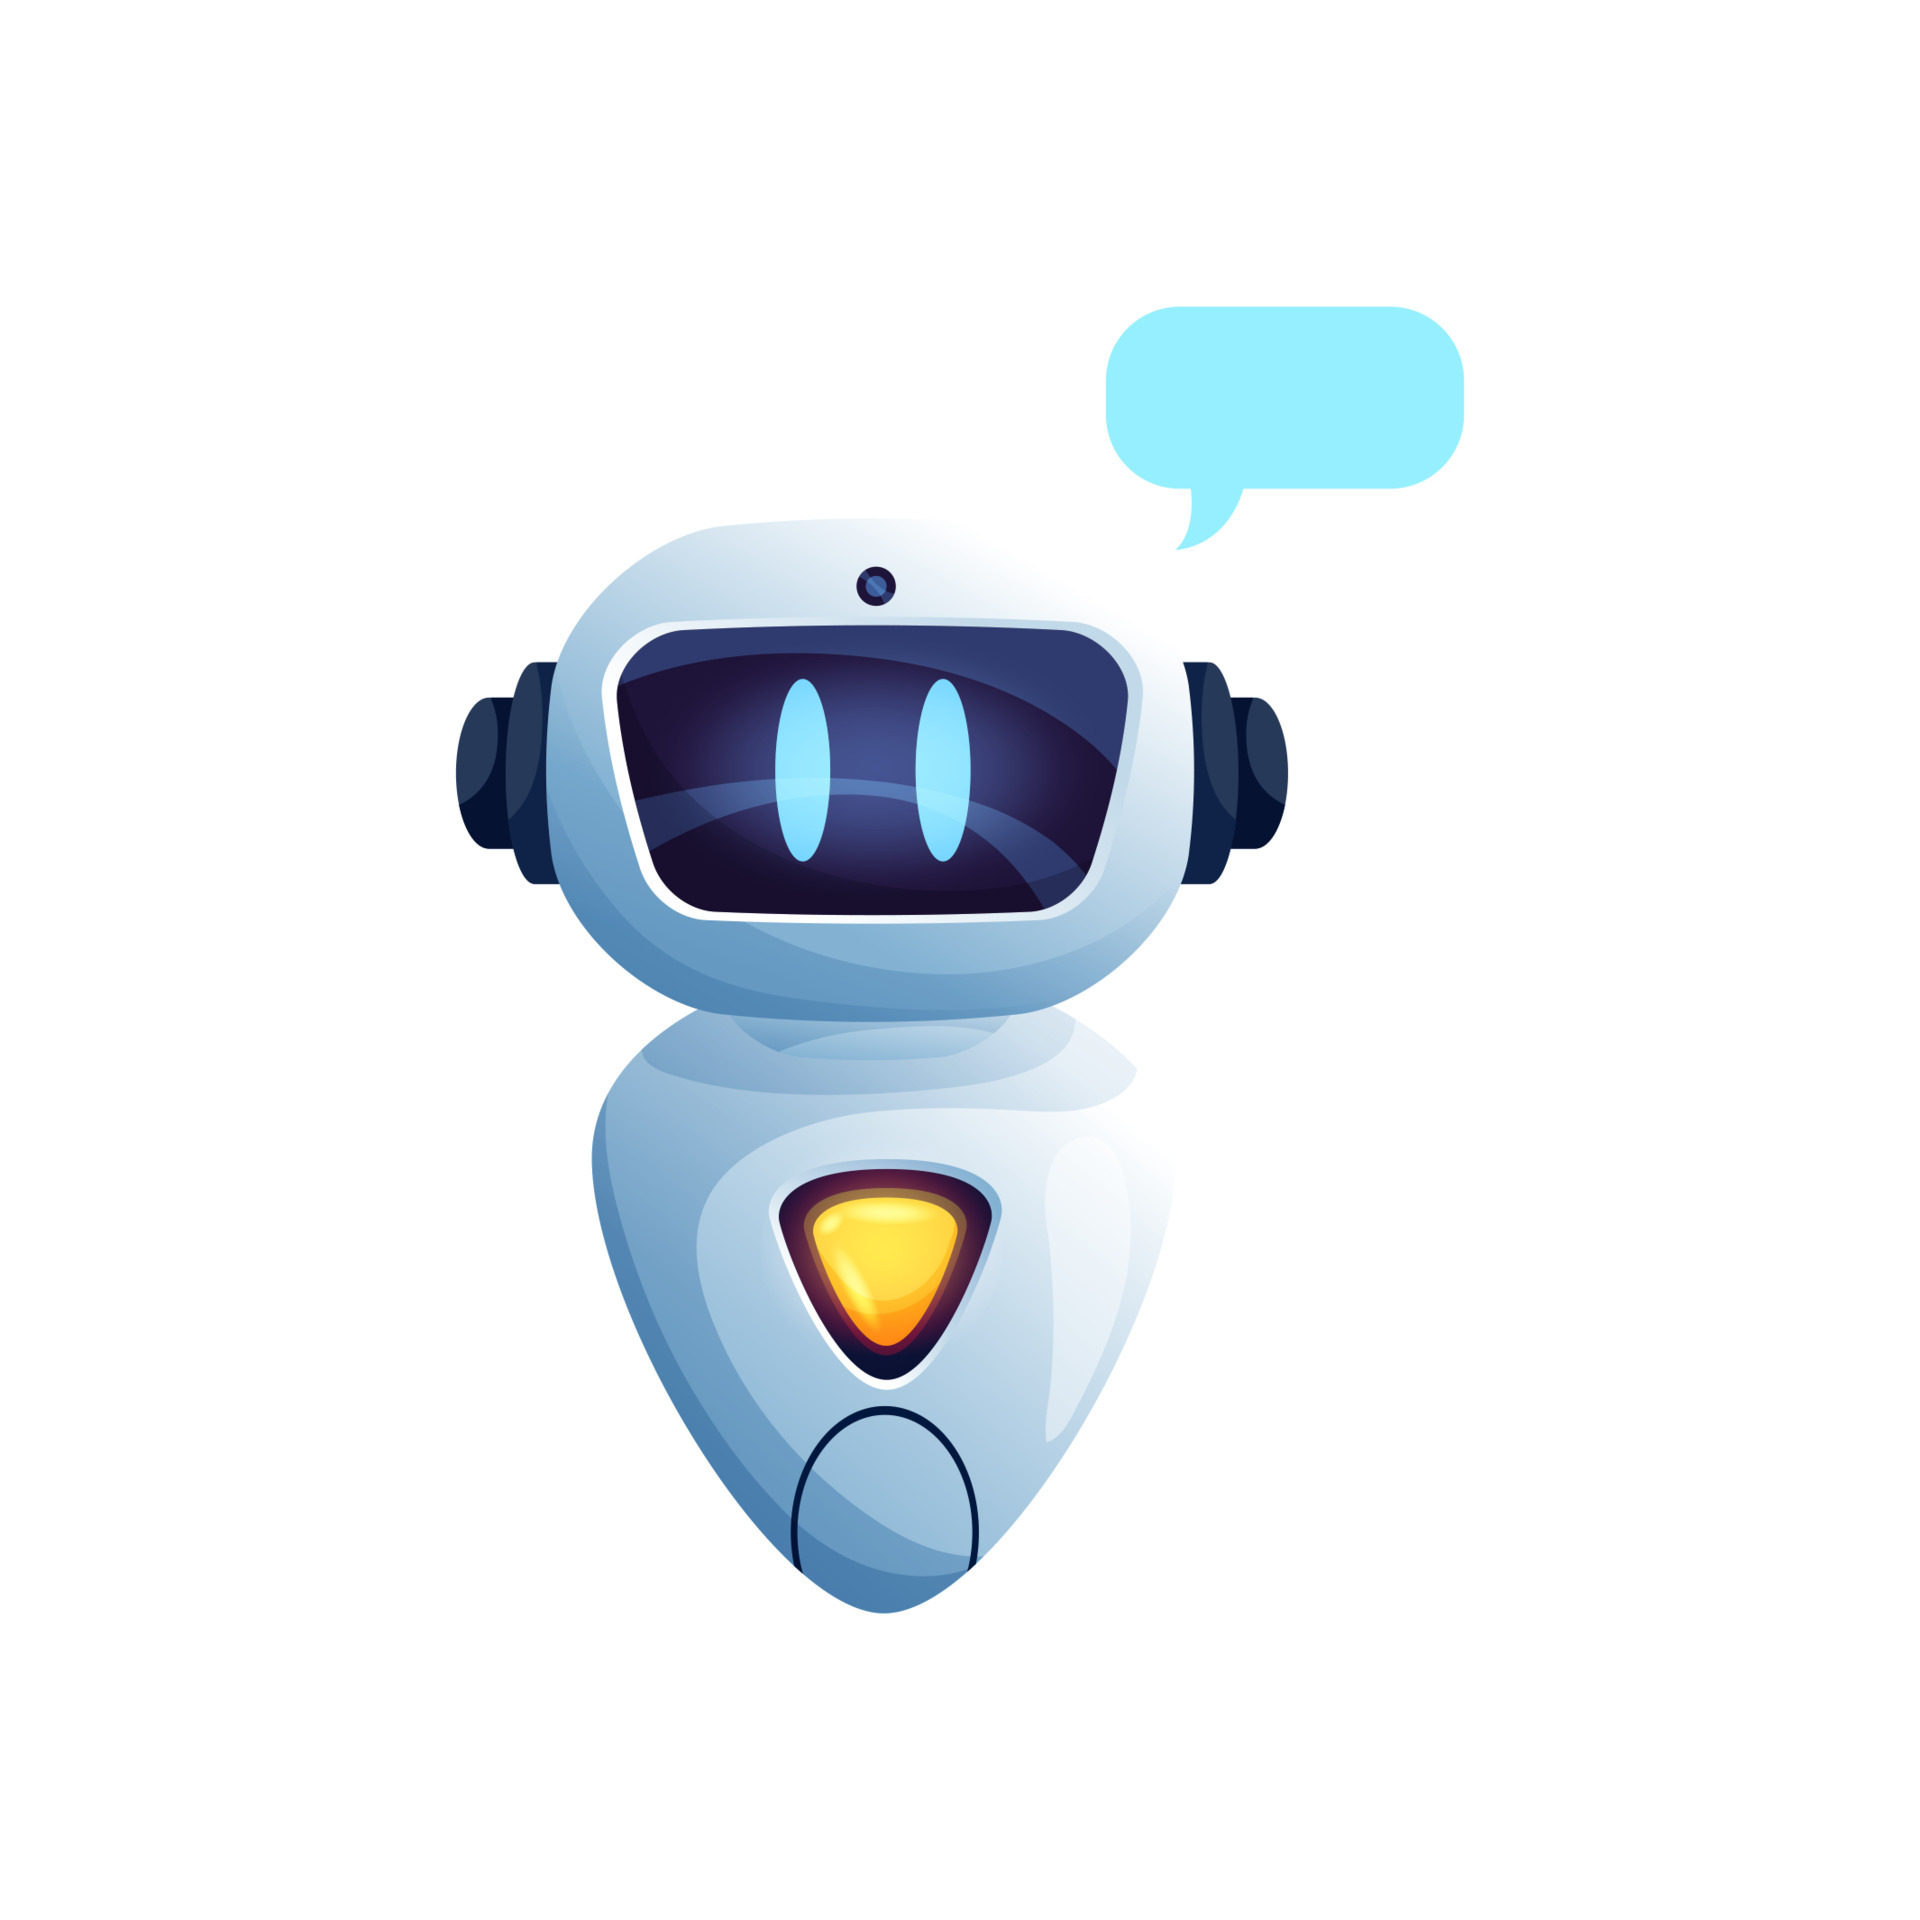 A Cute Smiling Robot Talking To A Chat Bot Vector Linear